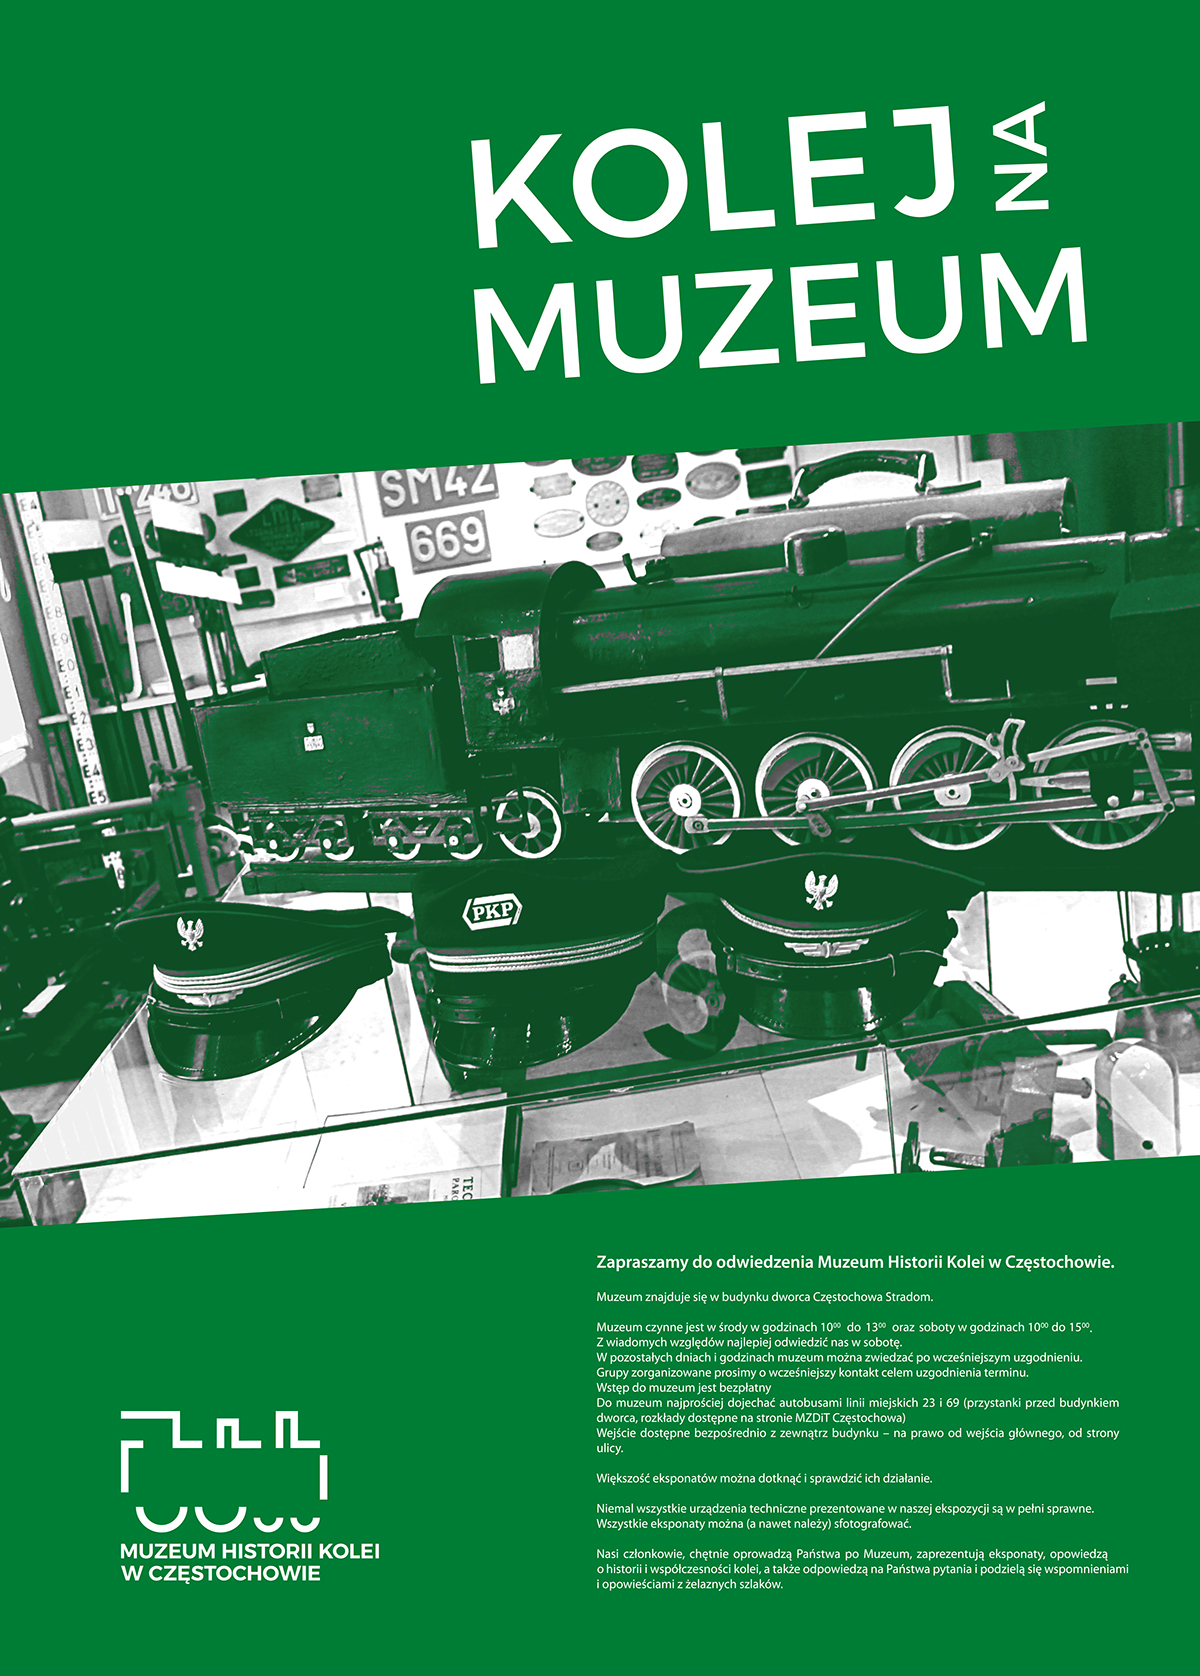 The visual identity the Museum the railway